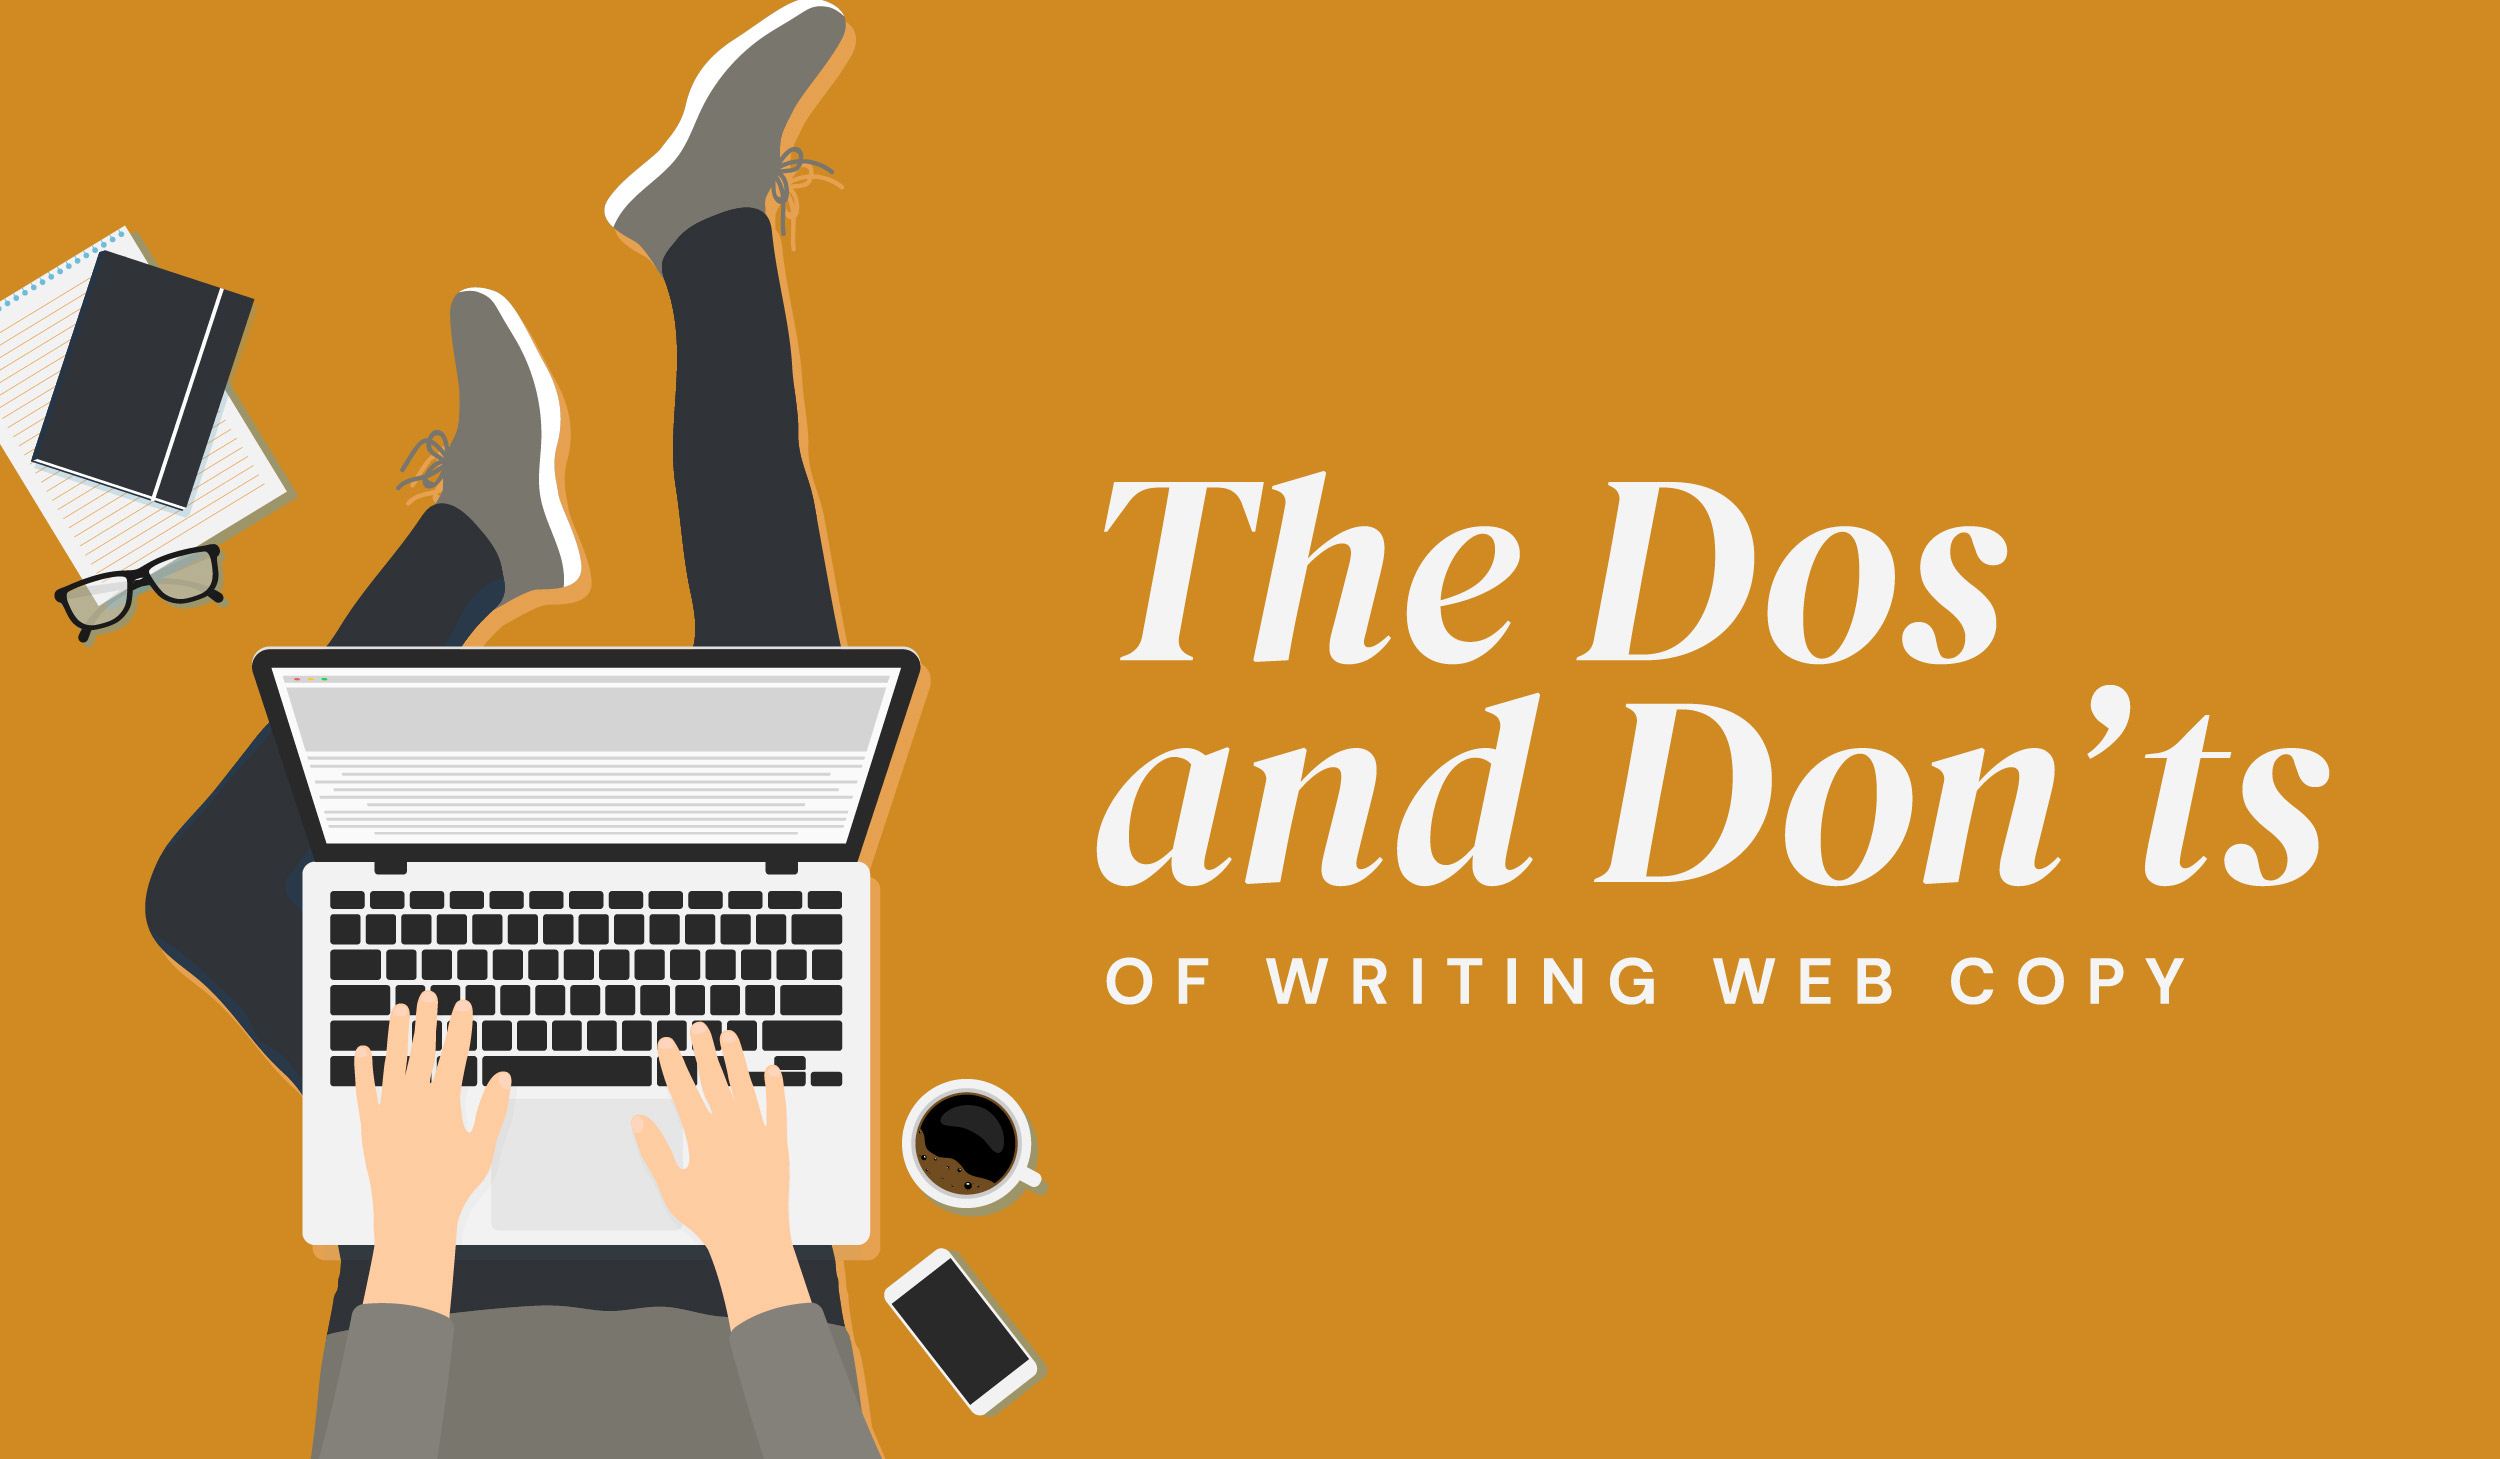 Do's and don'ts of web copy